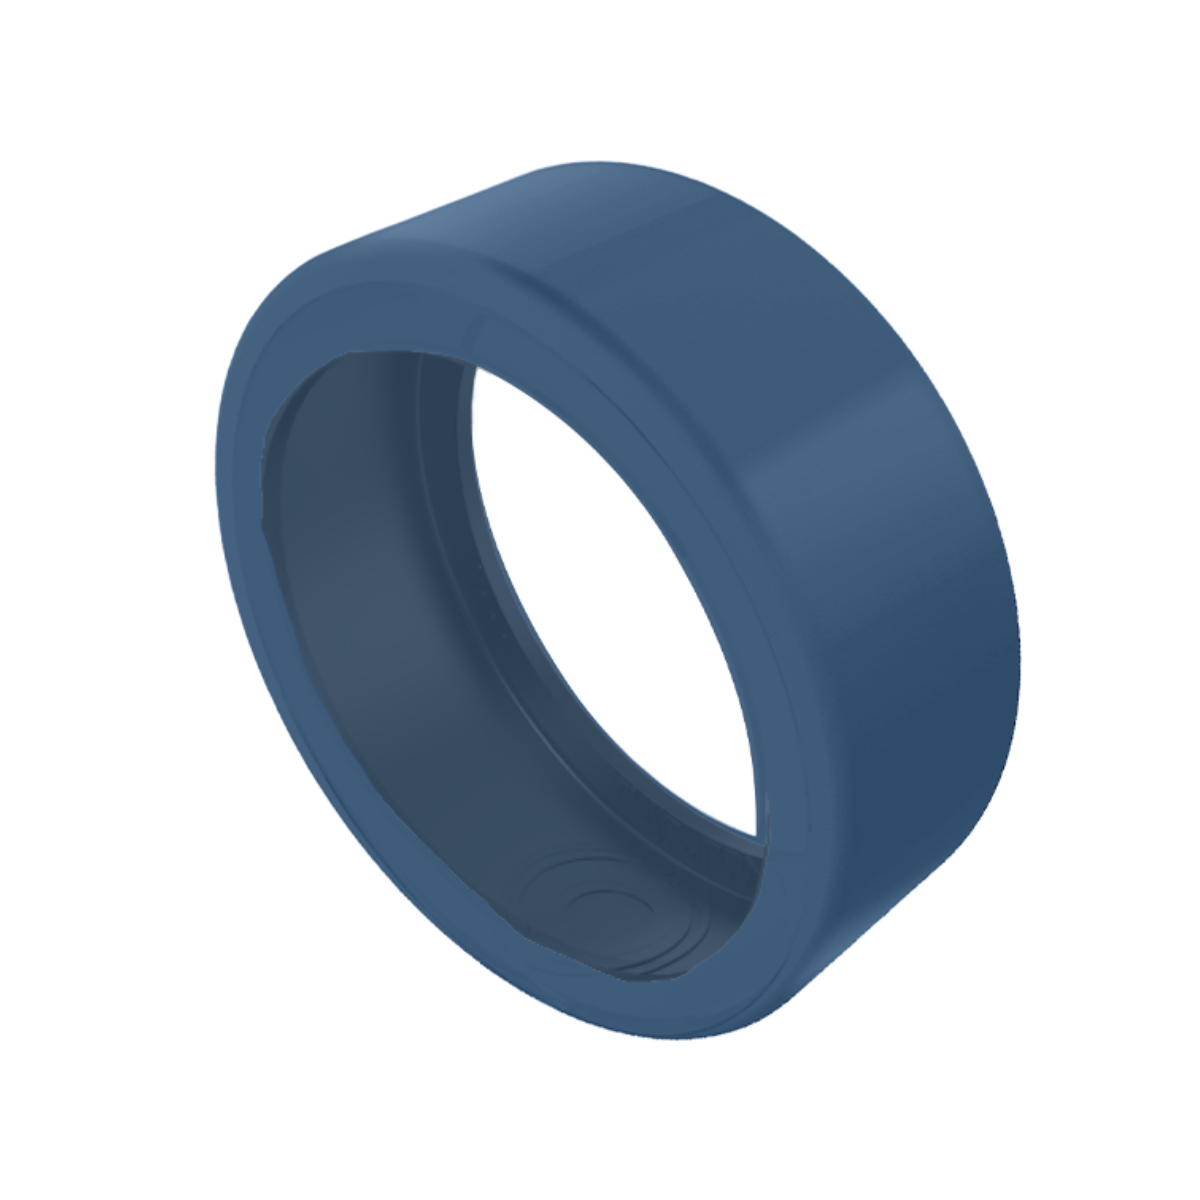 Oura Ring Protection Cover - OSleeve Midnight Blue